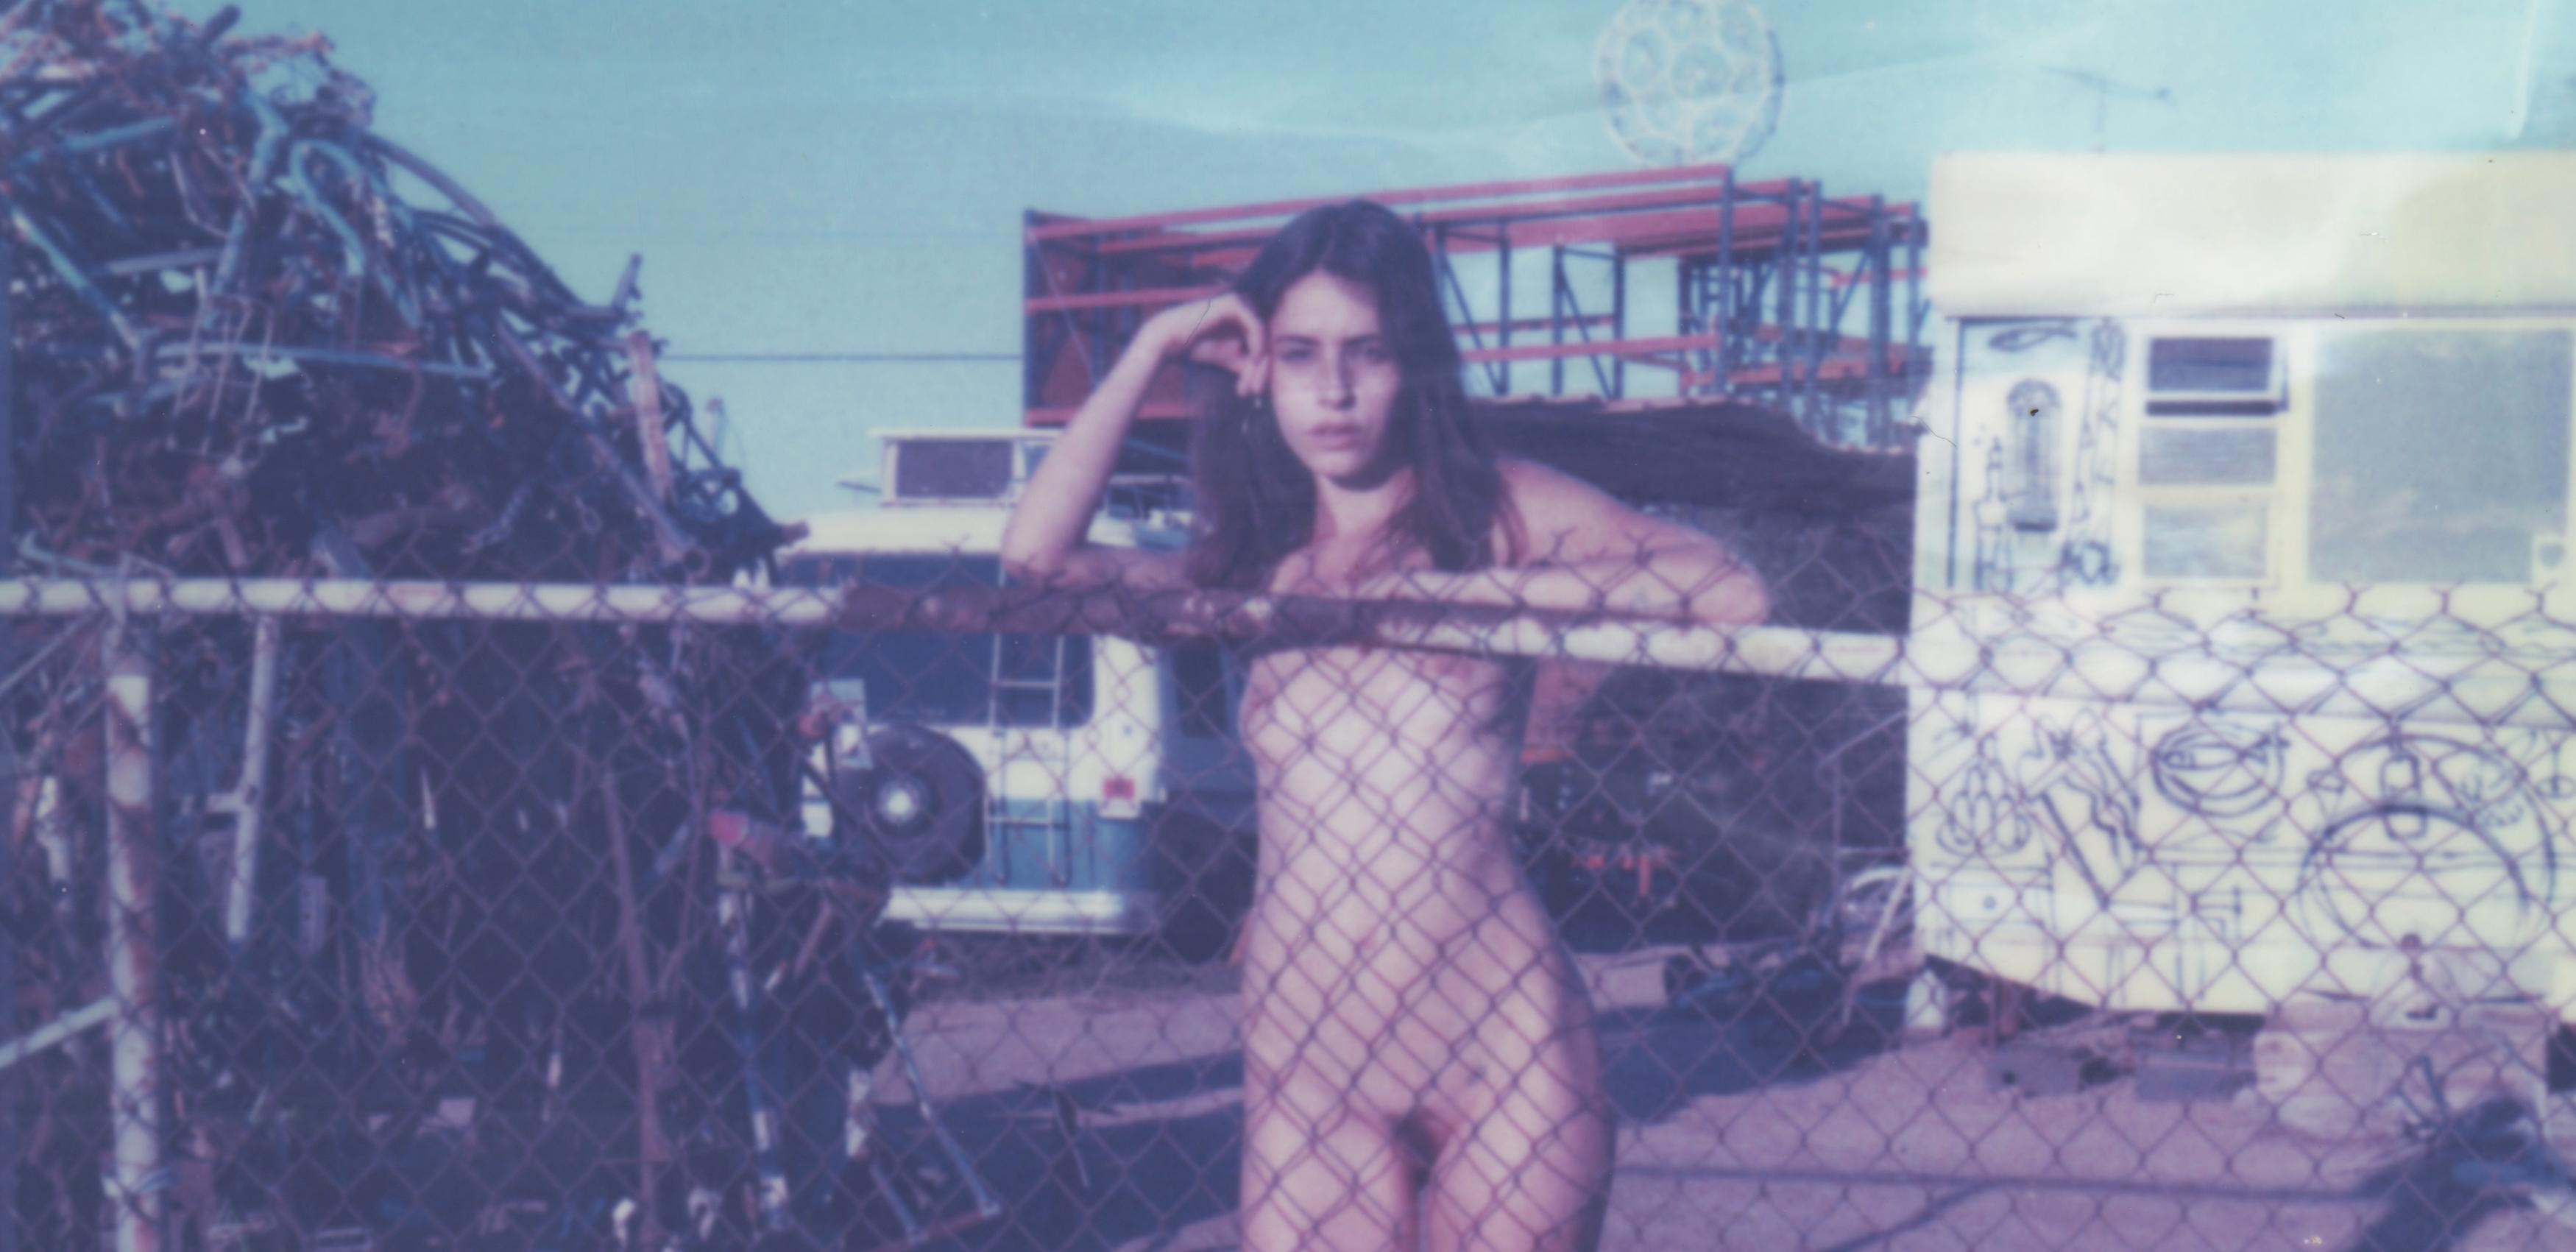 Don't fence me in - Contemporary, Polaroid, Nude, Color 2